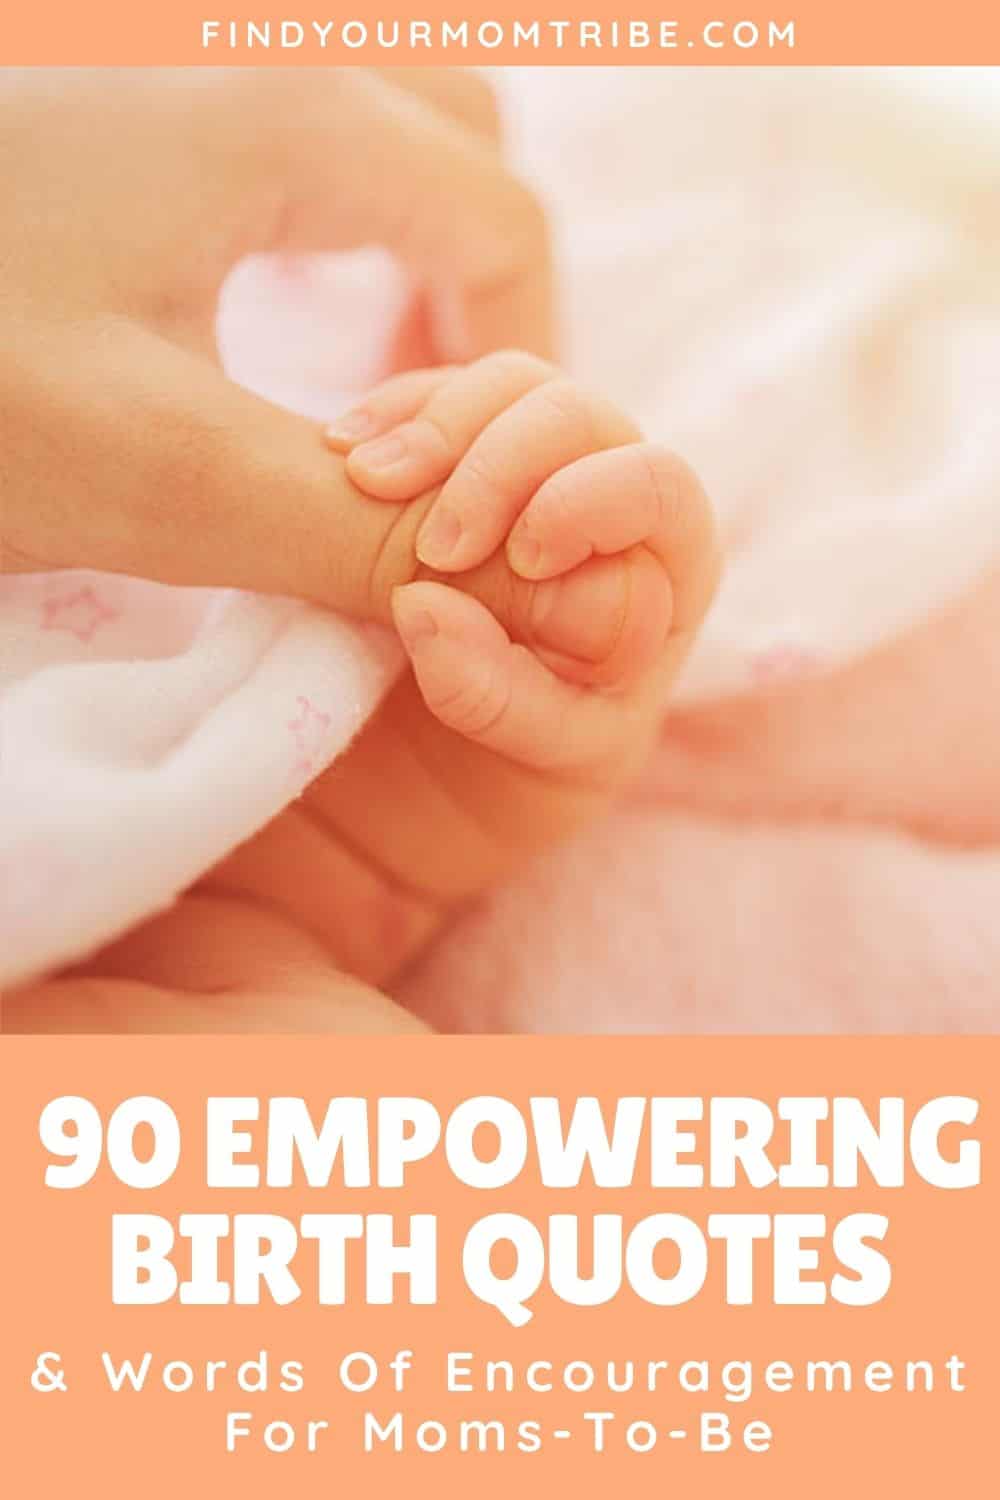 90 Empowering Birth Quotes & Words Of Encouragement For Moms-To-Be